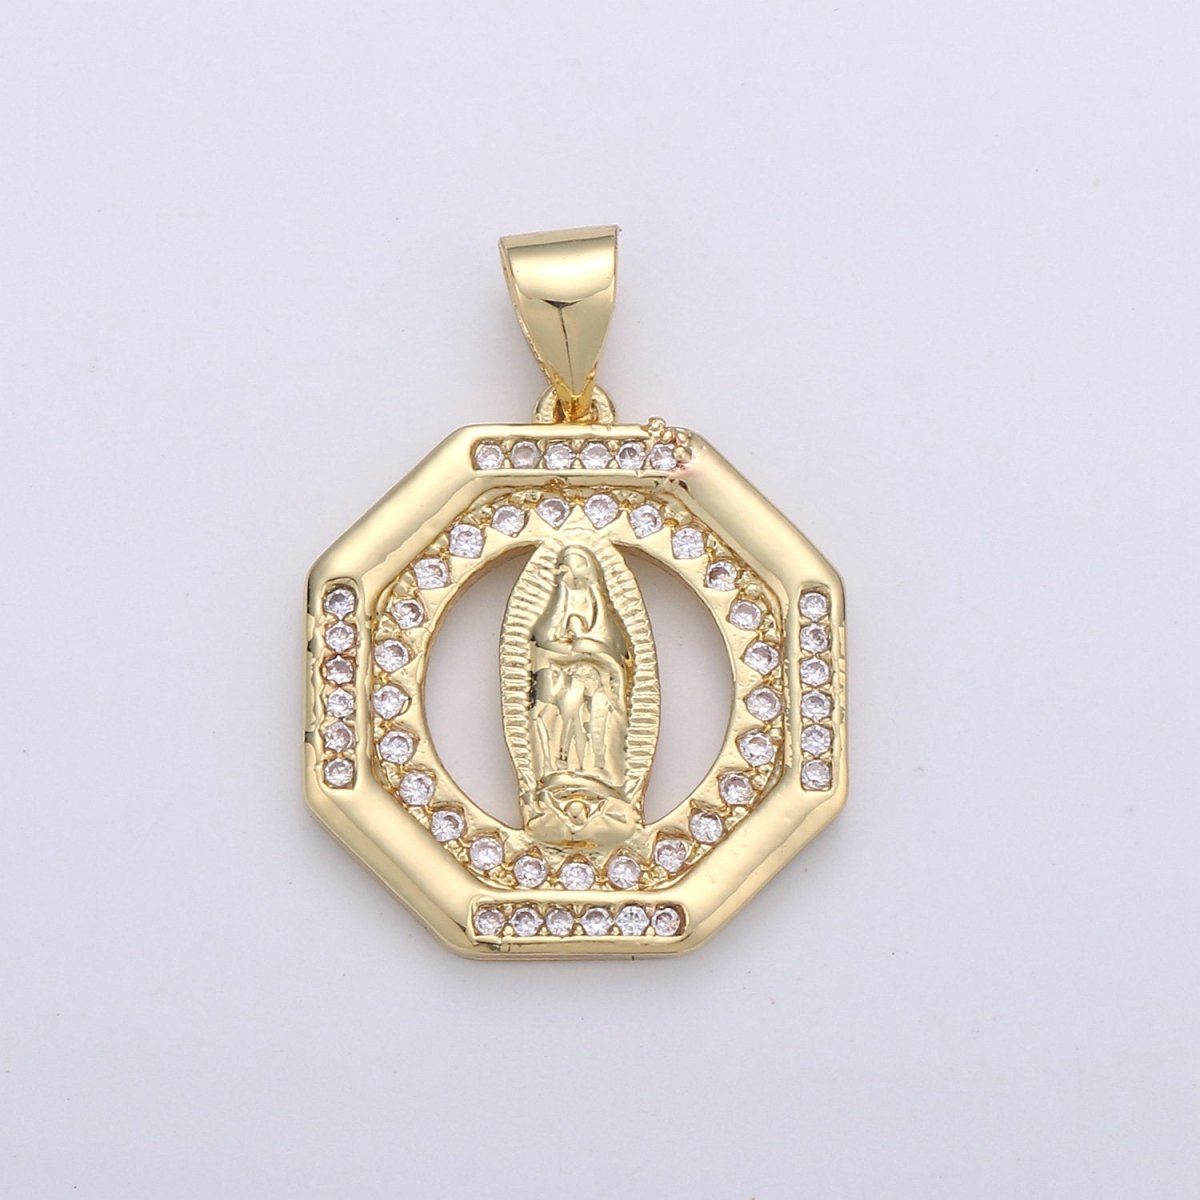 Dainty 24k Gold Filled Virgin Mary Medallion Necklace Octagon Virgin Mary Pendant for Religious Necklace Lady Guadalupe Charm 23x18mm, D-083 - DLUXCA